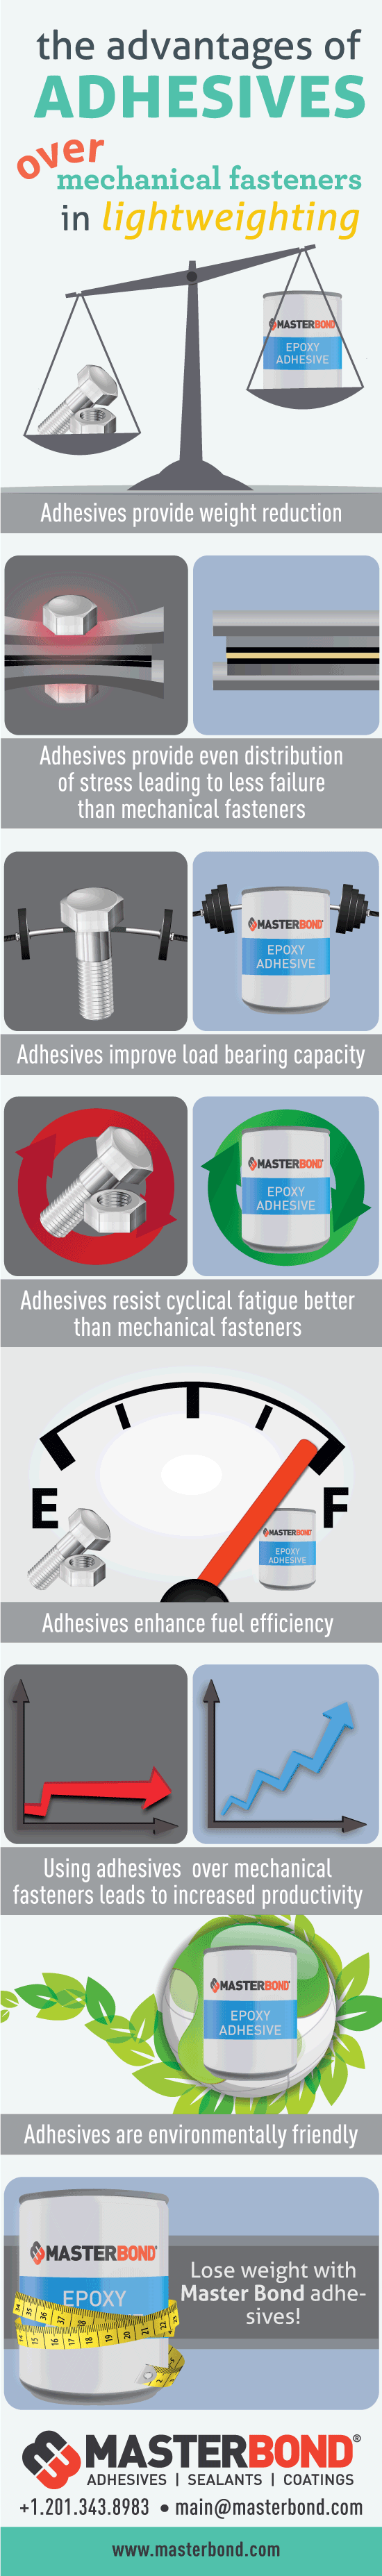 Advantages of Adhesives Over Mechanical Fasteners